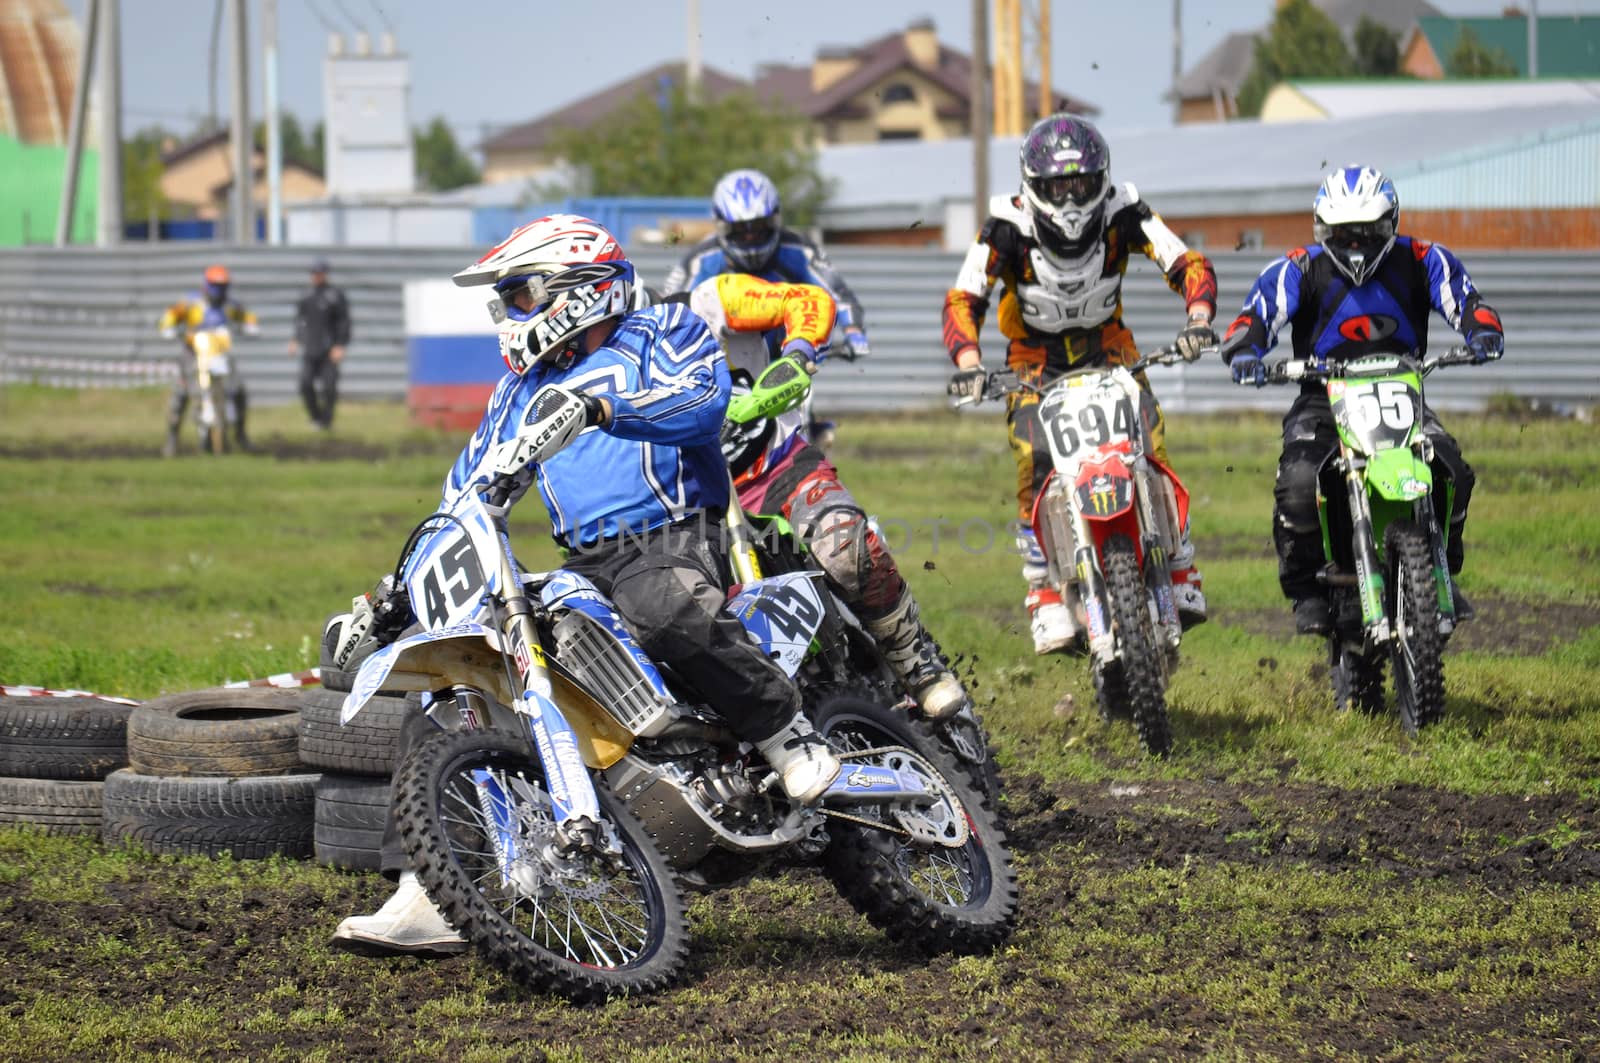 Cross-country race. Motorcyclists on motorcycles enter turn